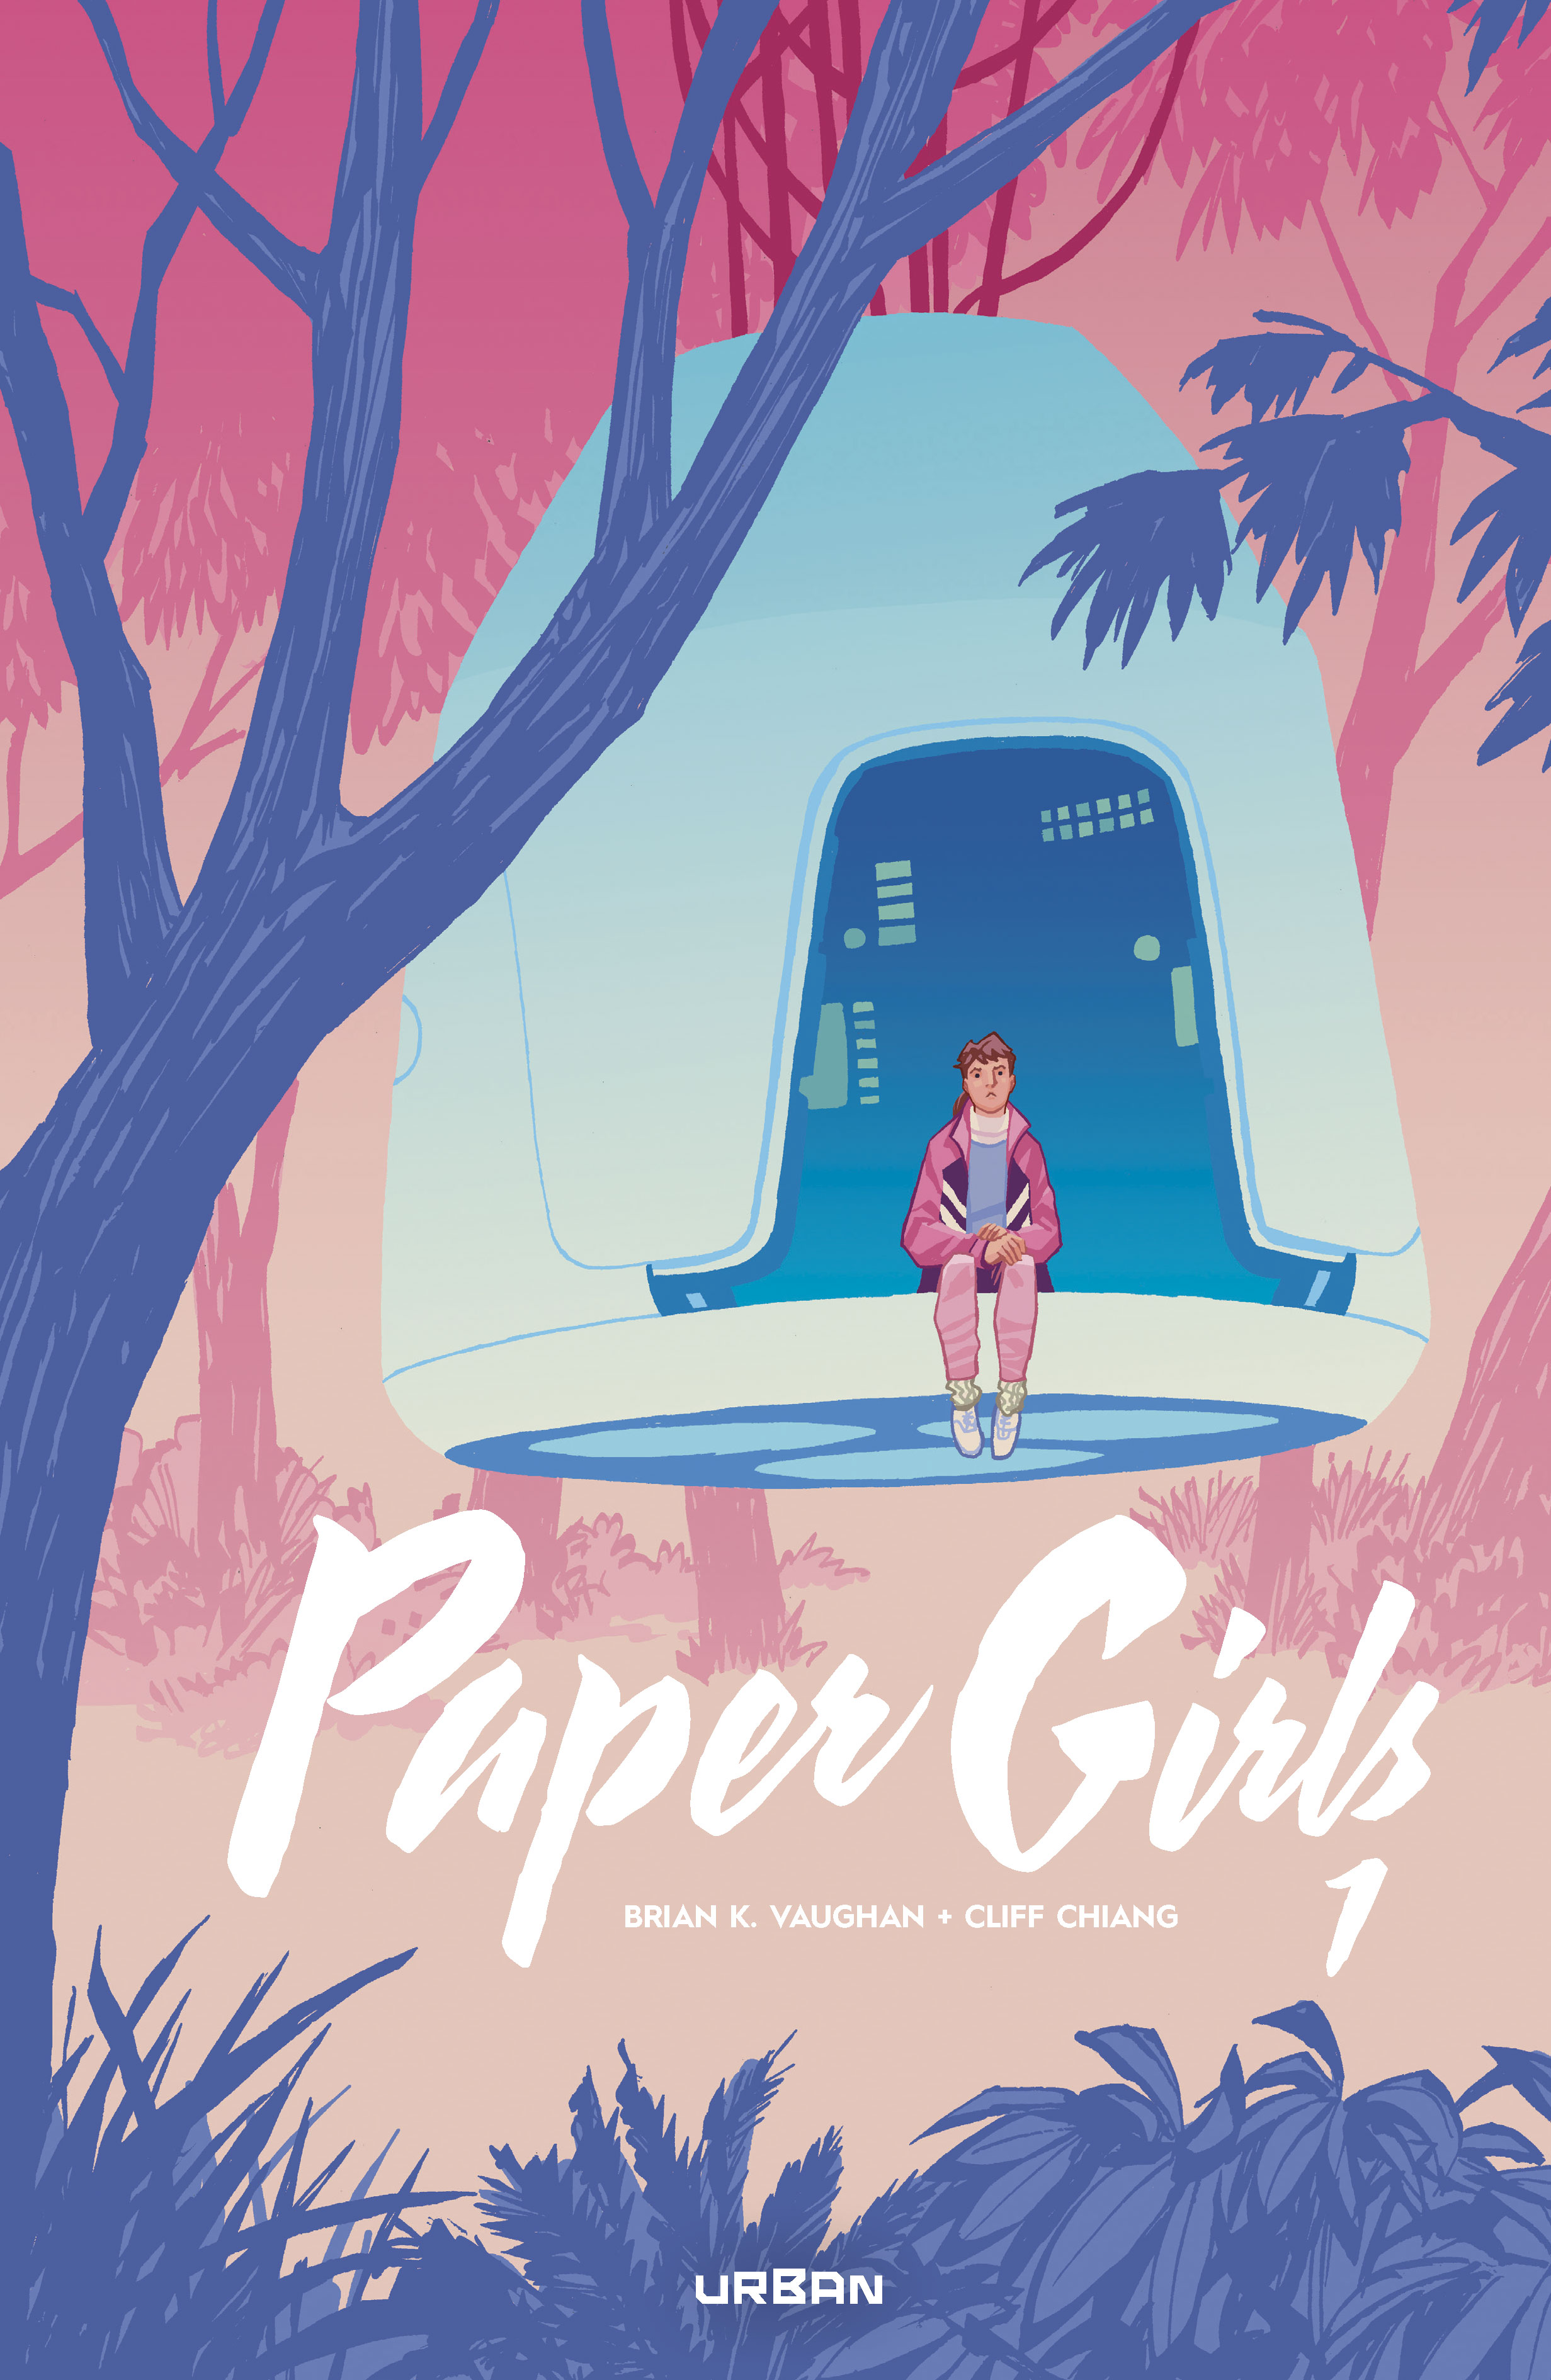 Paper Girls intégrale – Tome 1 - couv